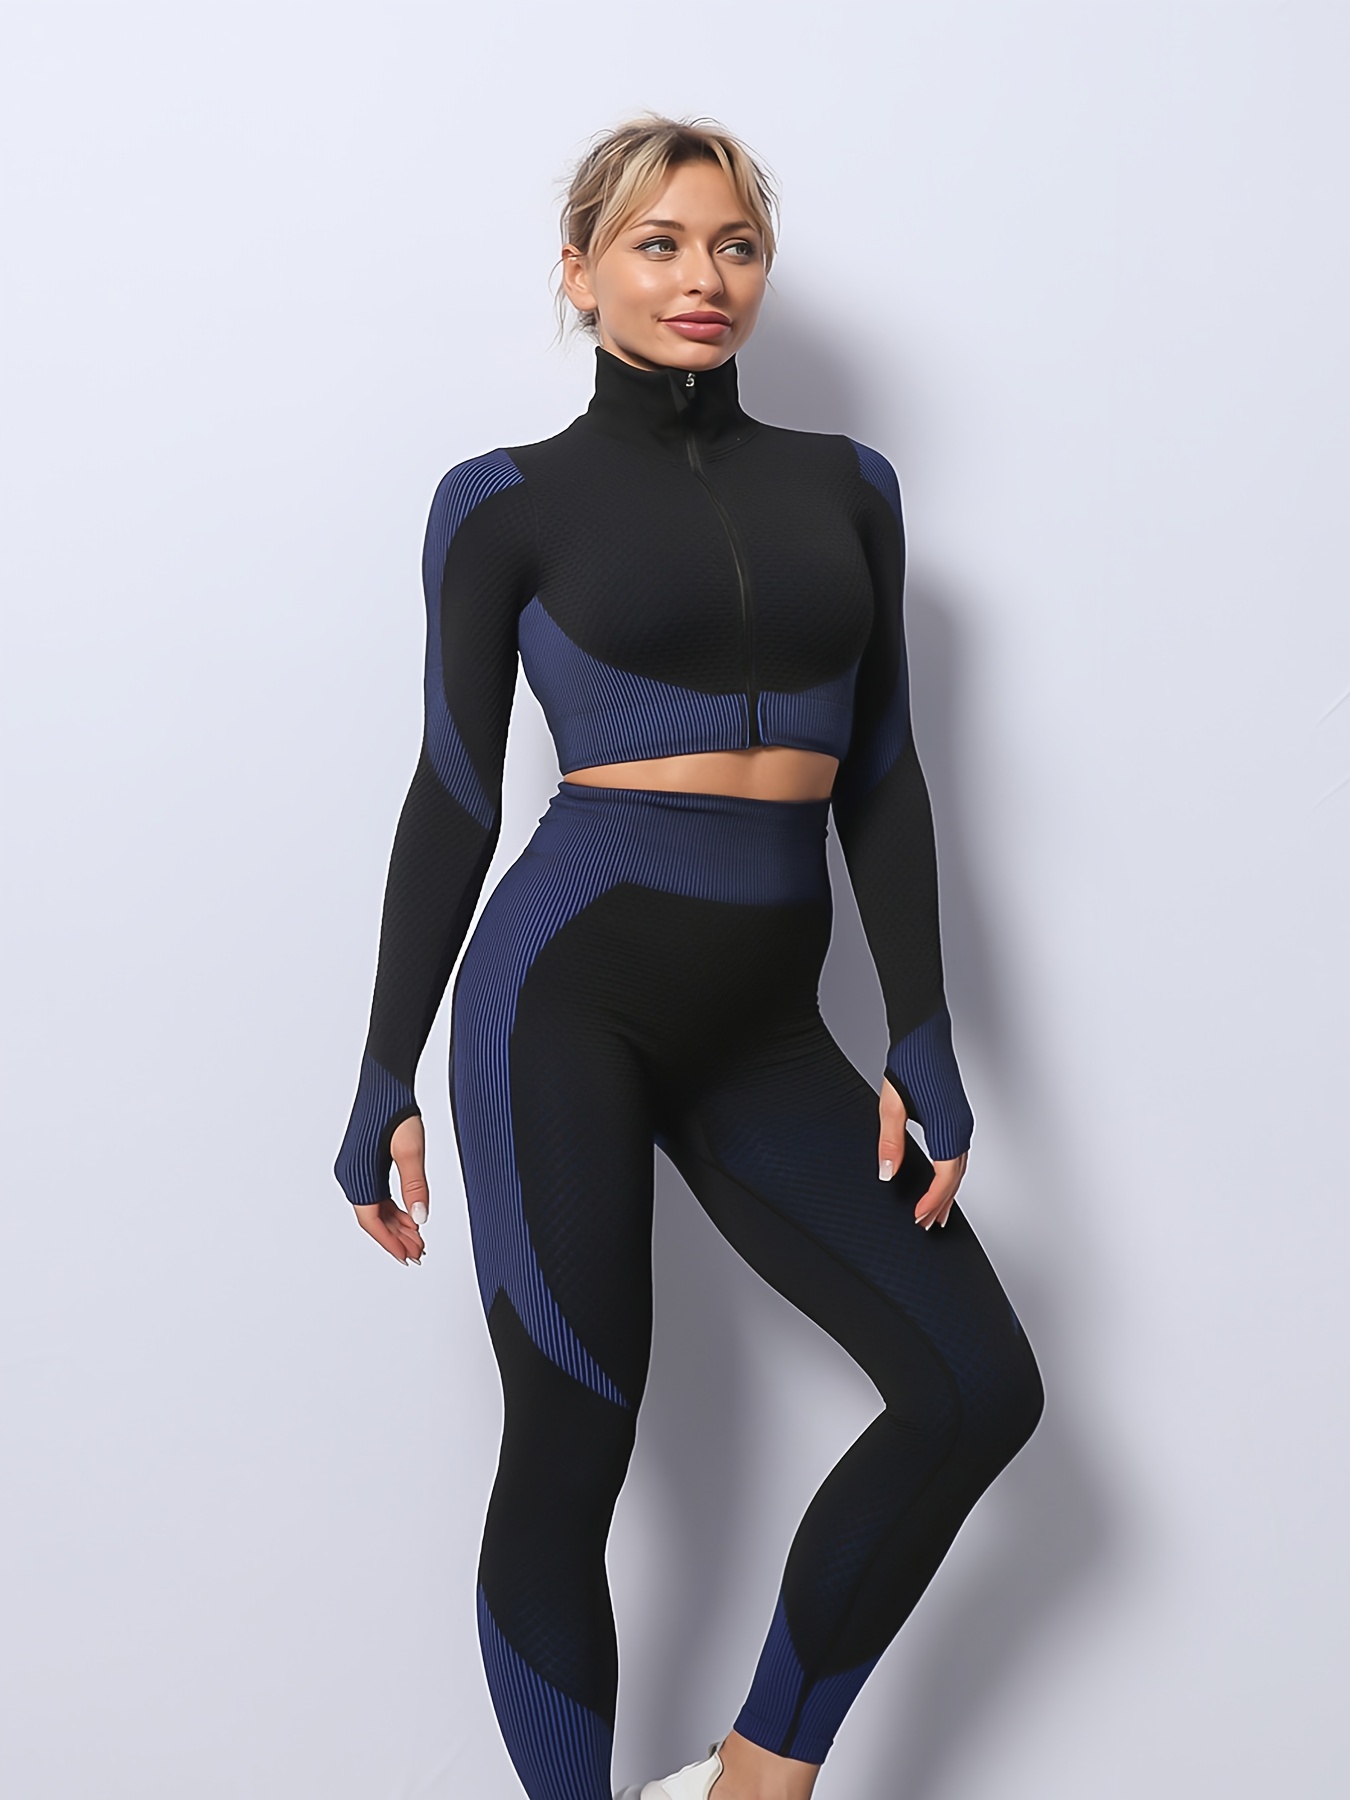 Womens Seamless Yoga Set Sports Bra And Crz Yoga Leggings For Gym, Fitness,  And Workout Costume T200115 From Xue04, $13.68